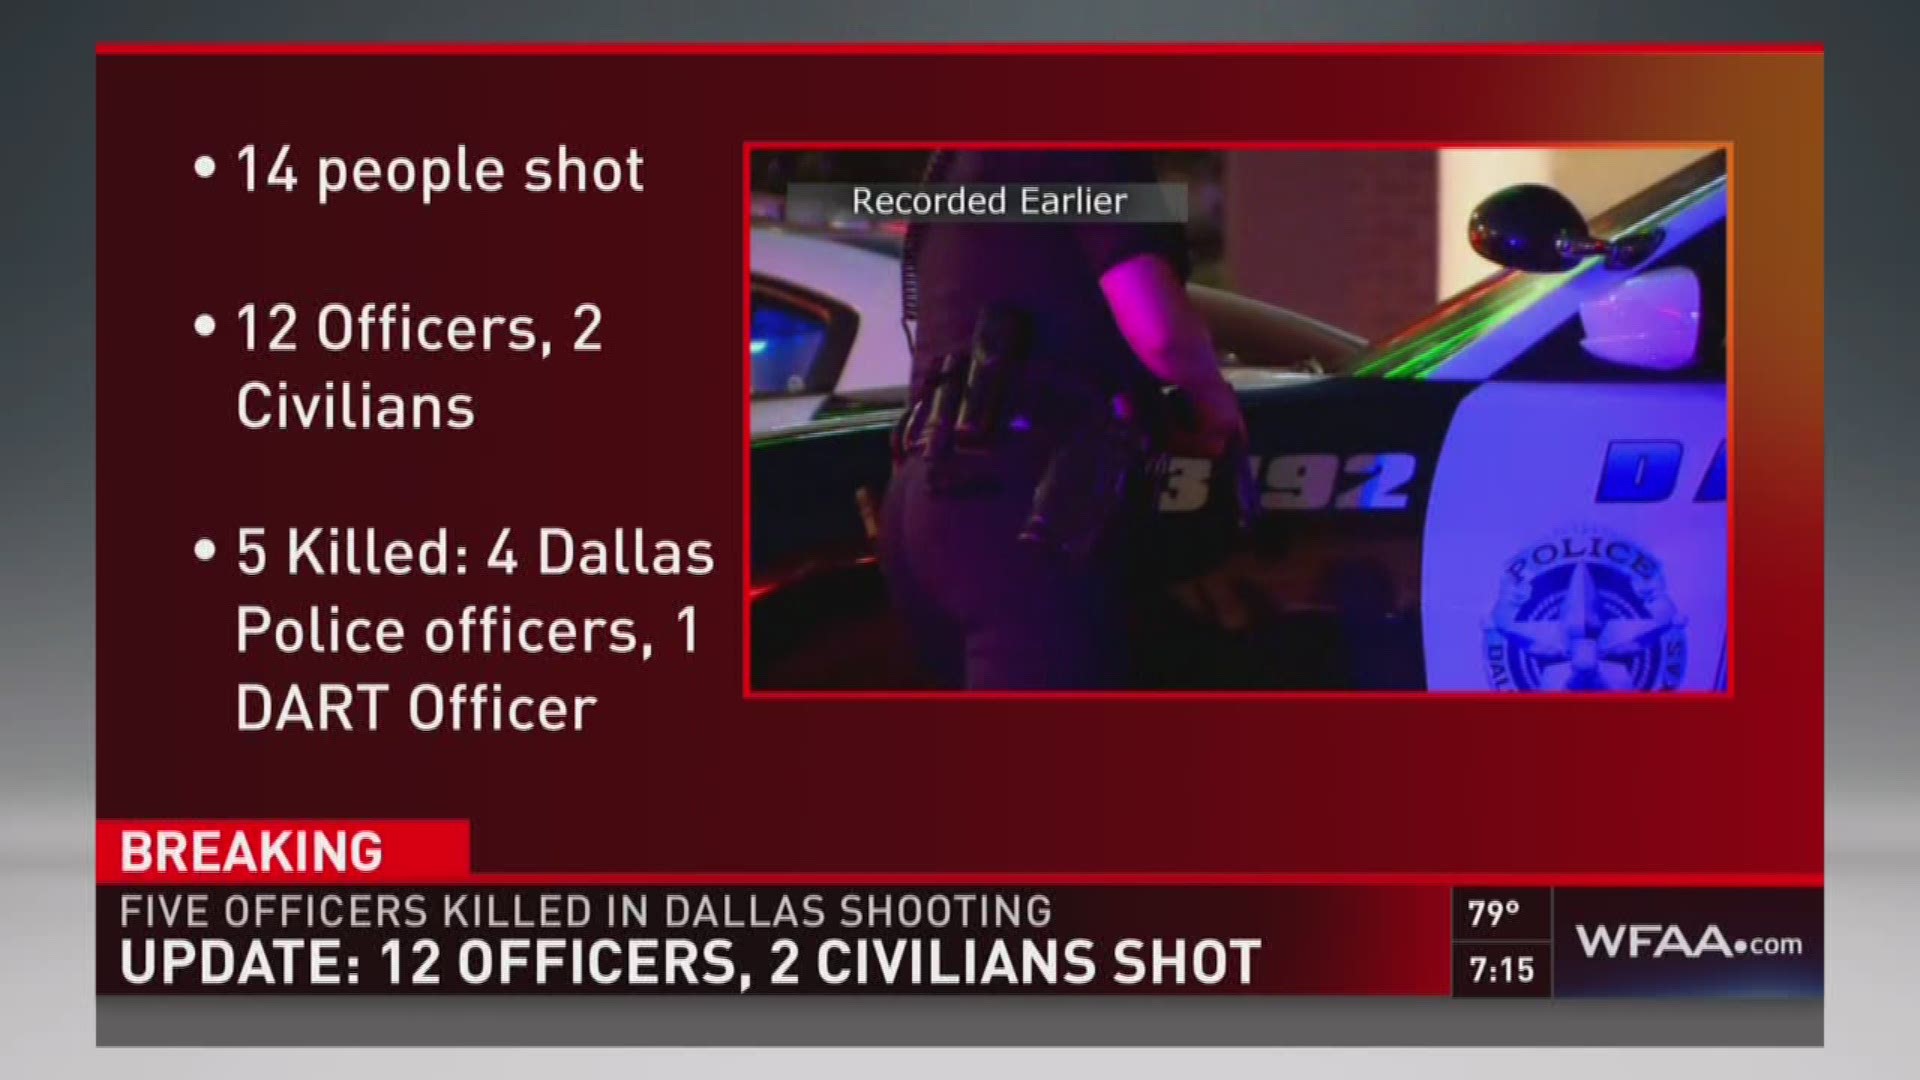 Fourteen people, 12 officers and two civilians, were shot. Of those shot, five officers were killed.